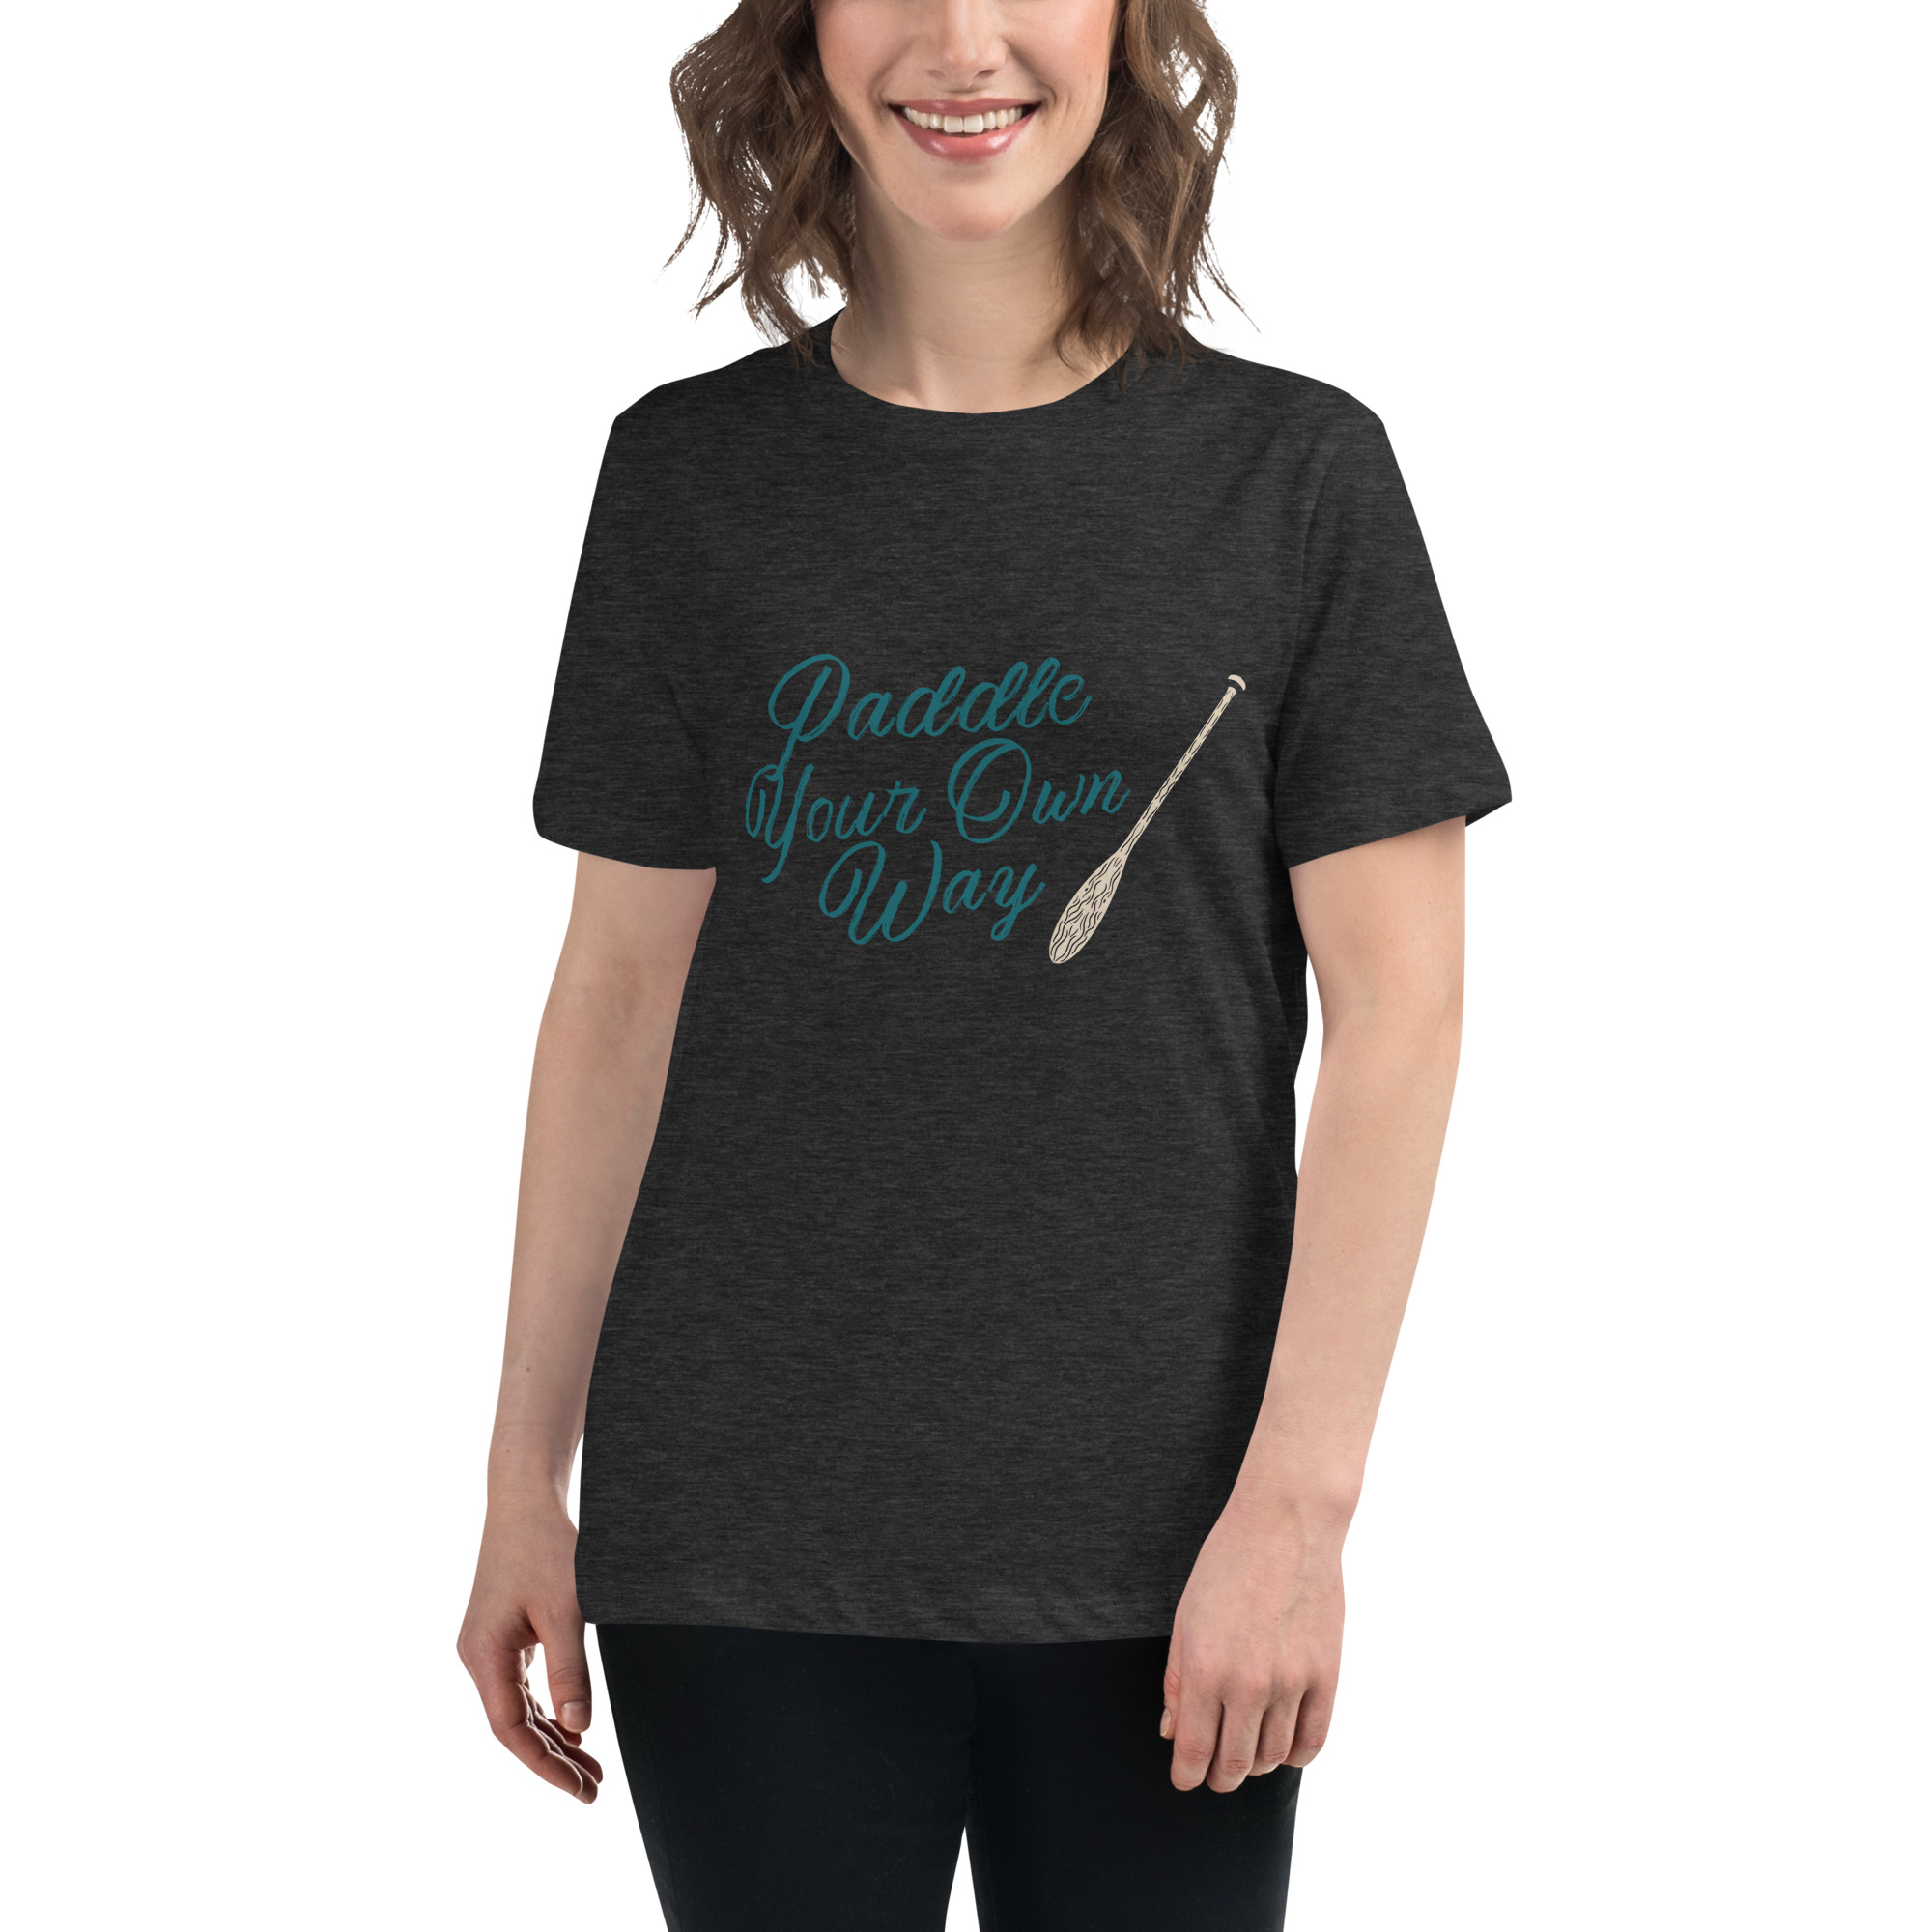 Paddle Your Own Way Women's Relaxed T-Shirt